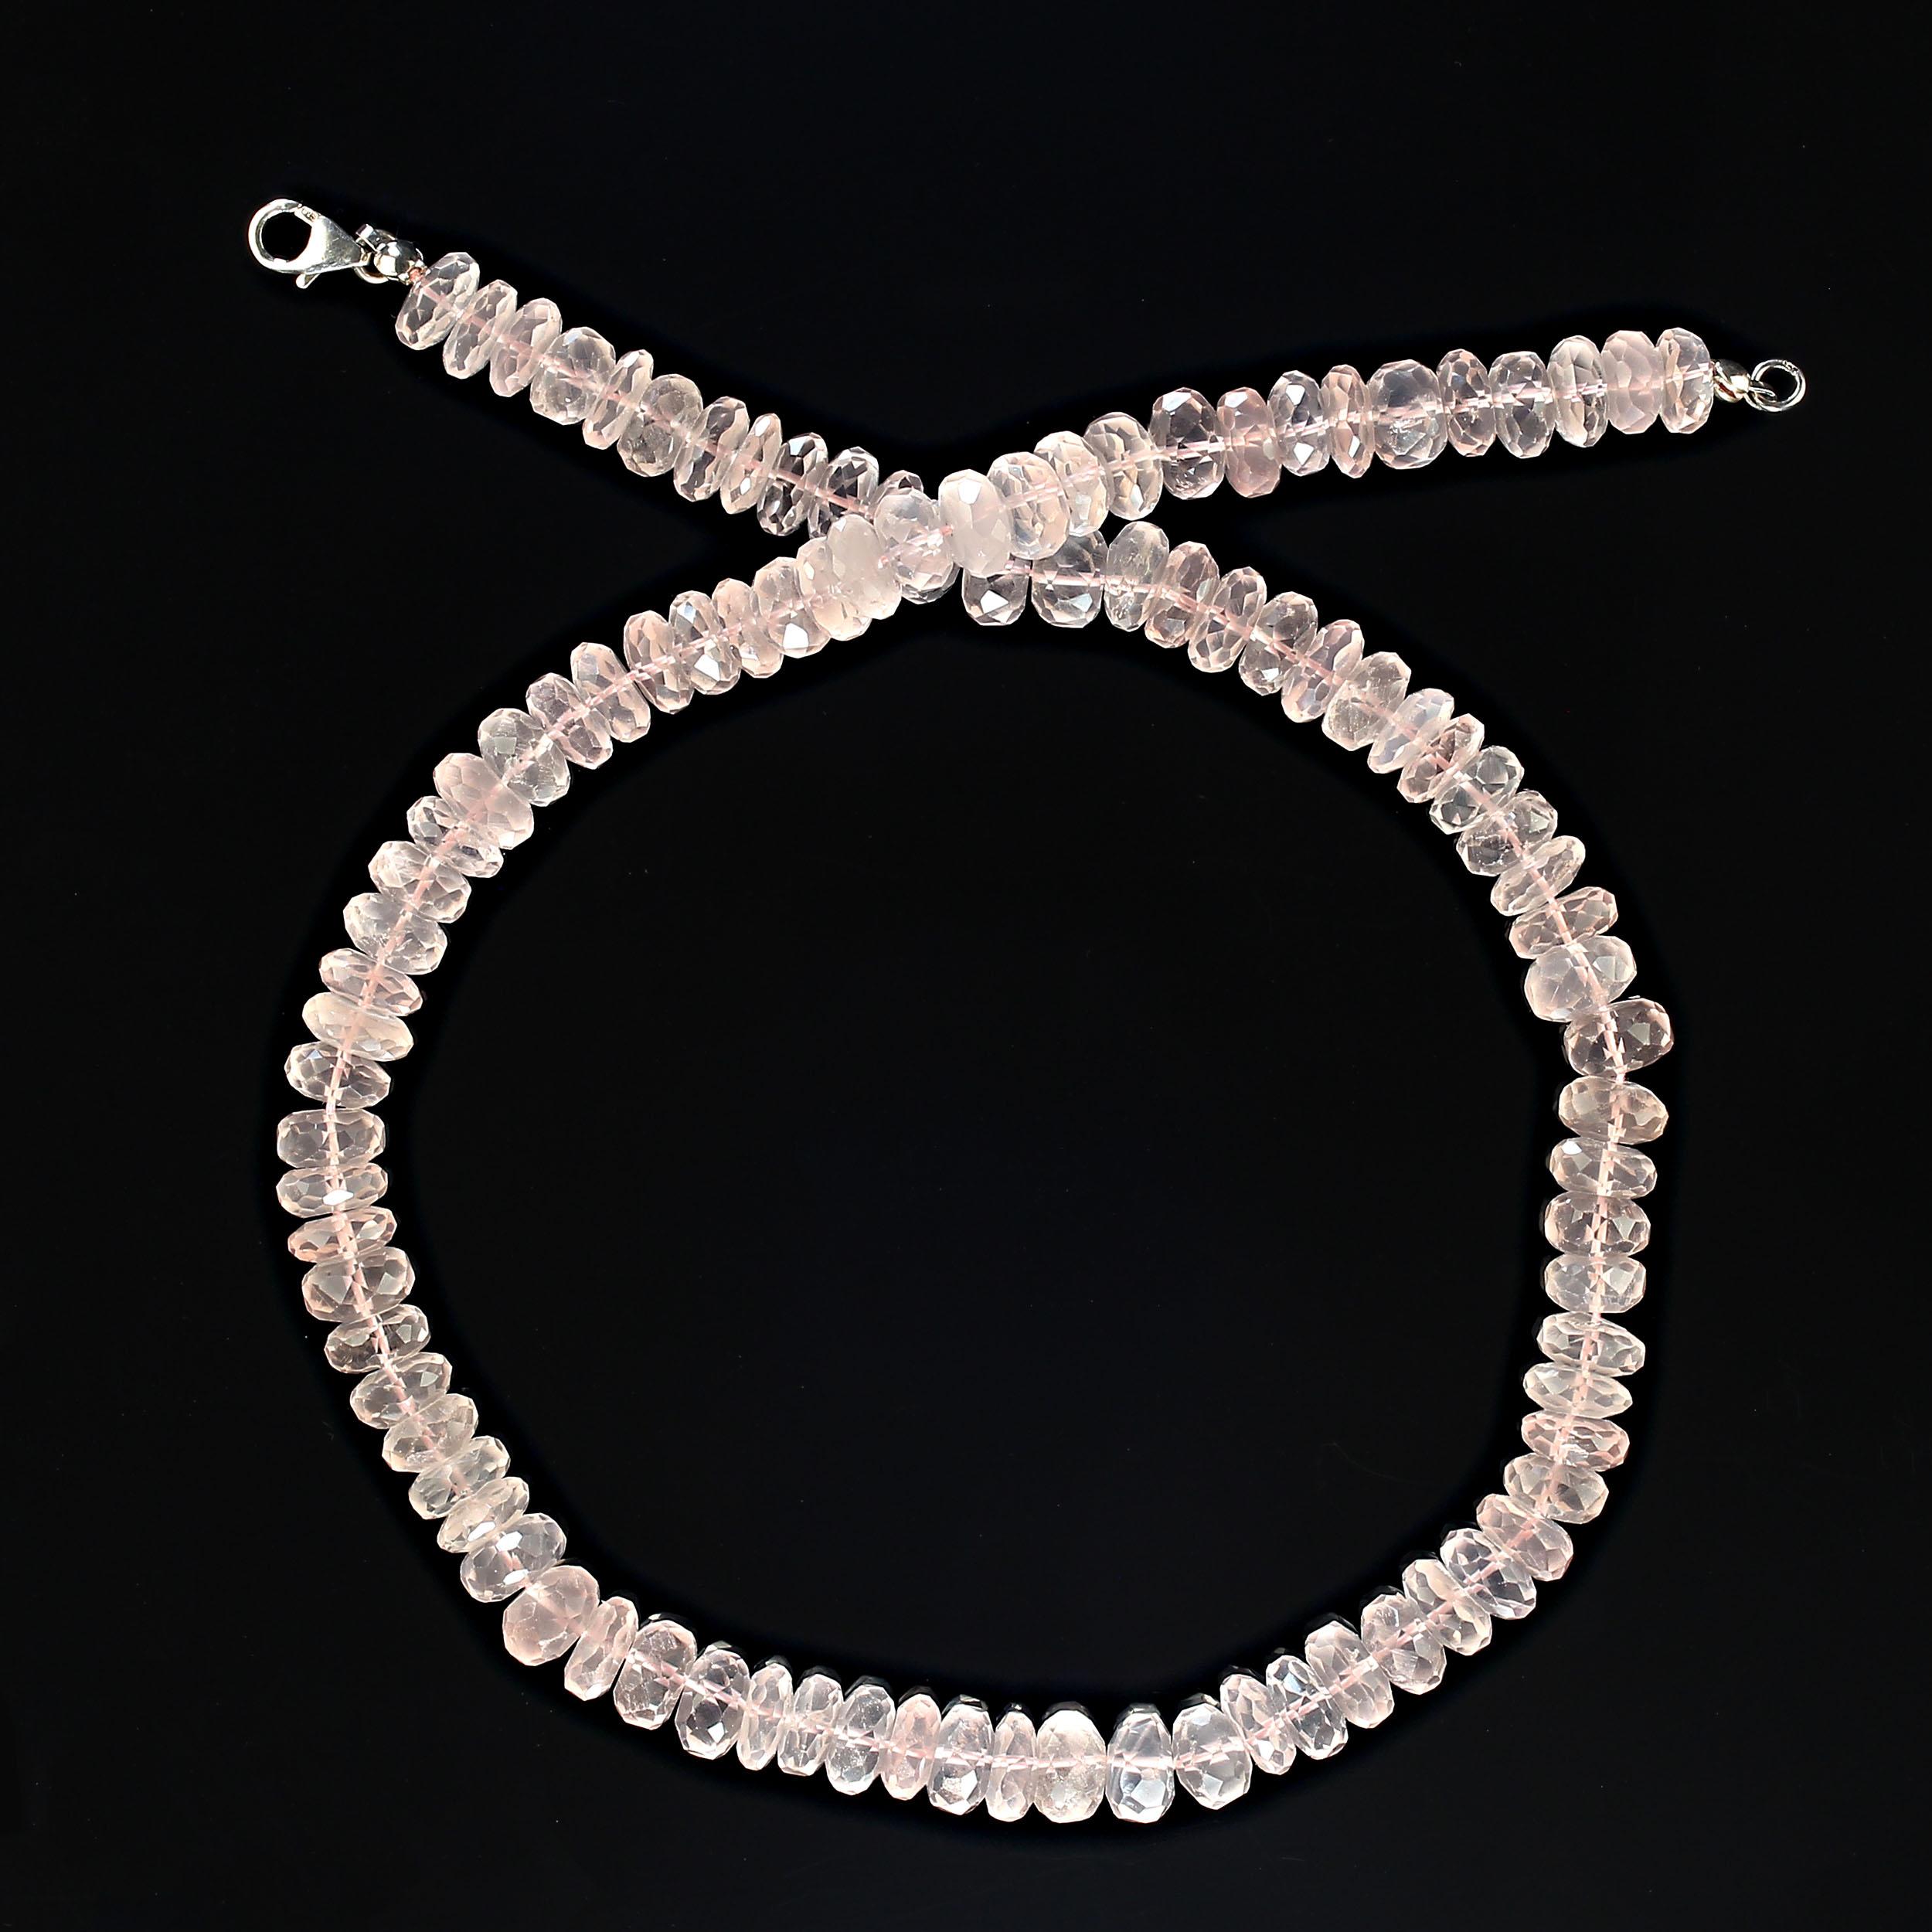 Happy Valentine's Day gift!
17 Inch Rose Quartz necklace of 8 mm faceted transparent/translucent rondelles.  This gorgeous necklace is perfect for dinner out is it loves the light and sparkles as you move.  The 17 in length fits just inside most